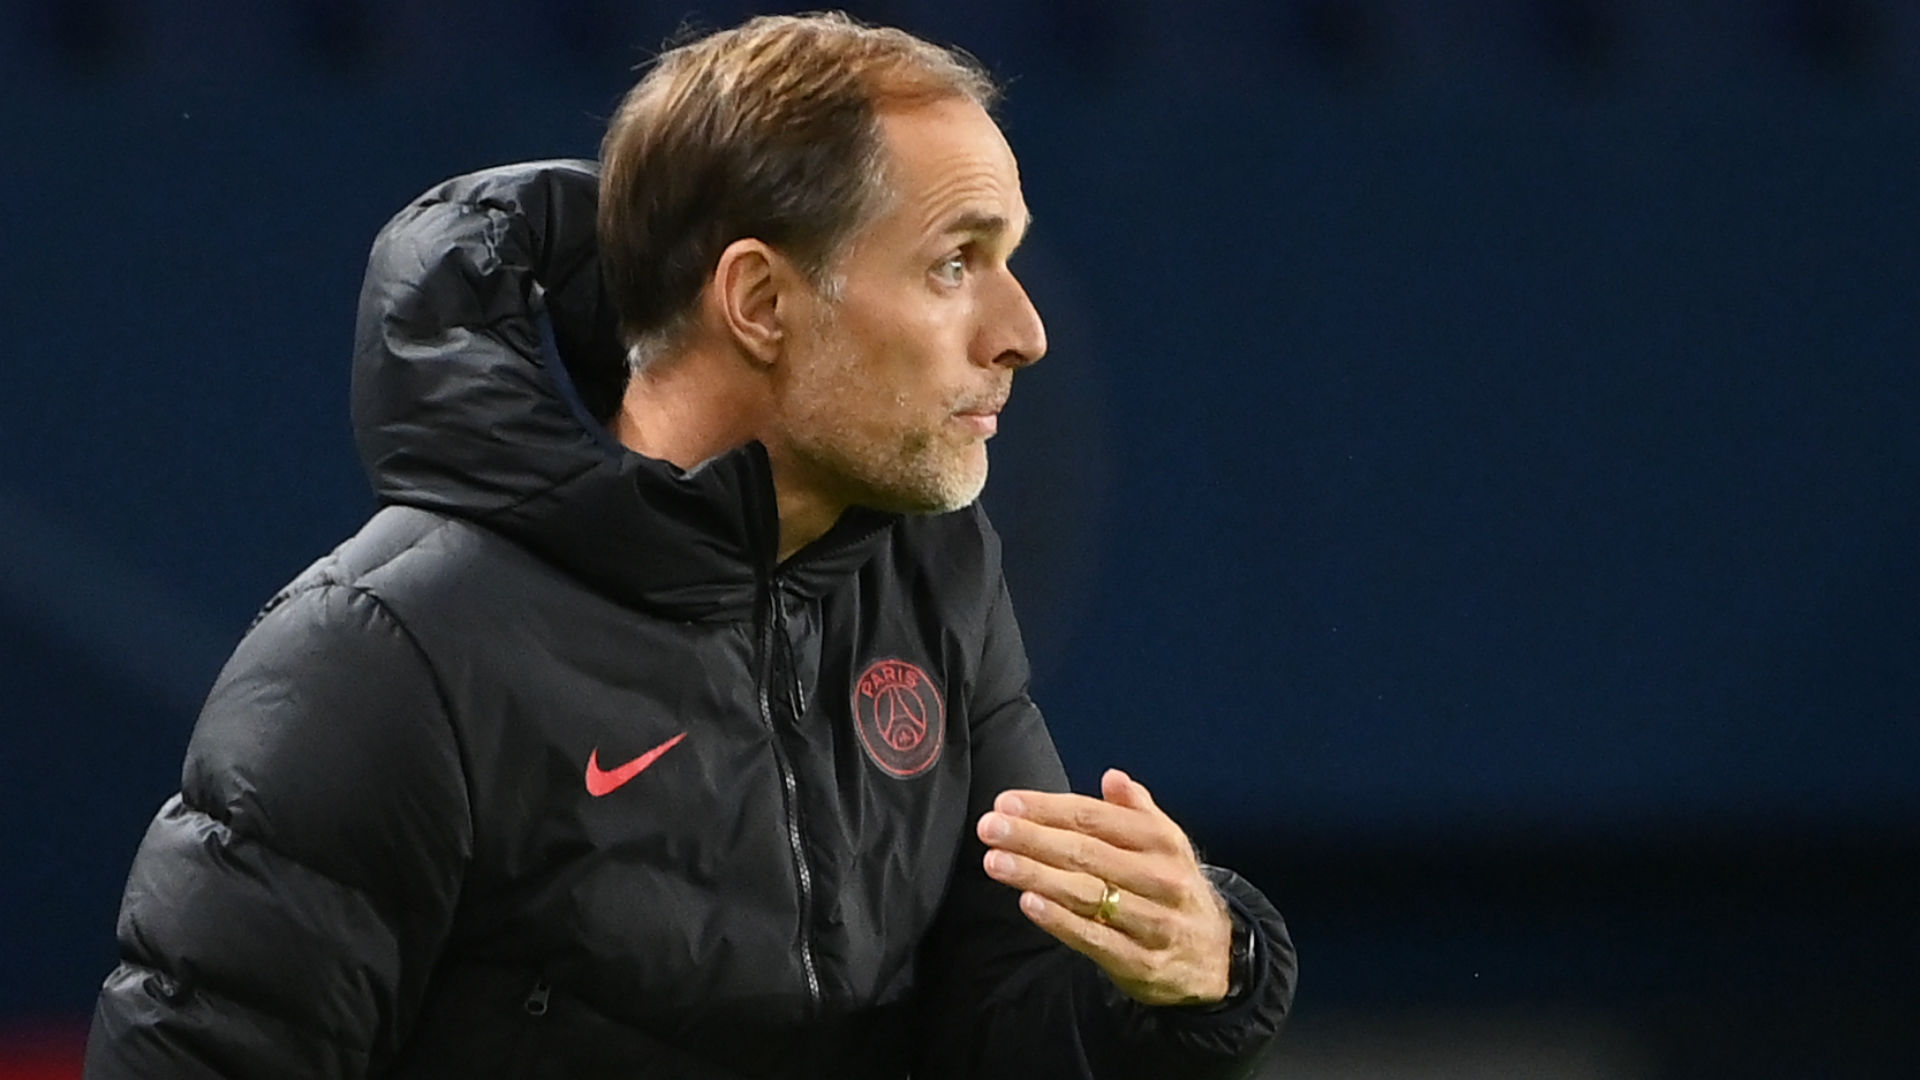 'It was a joke' - Tuchel clarifies controversial PSG comments that he claims weren't translated correctly